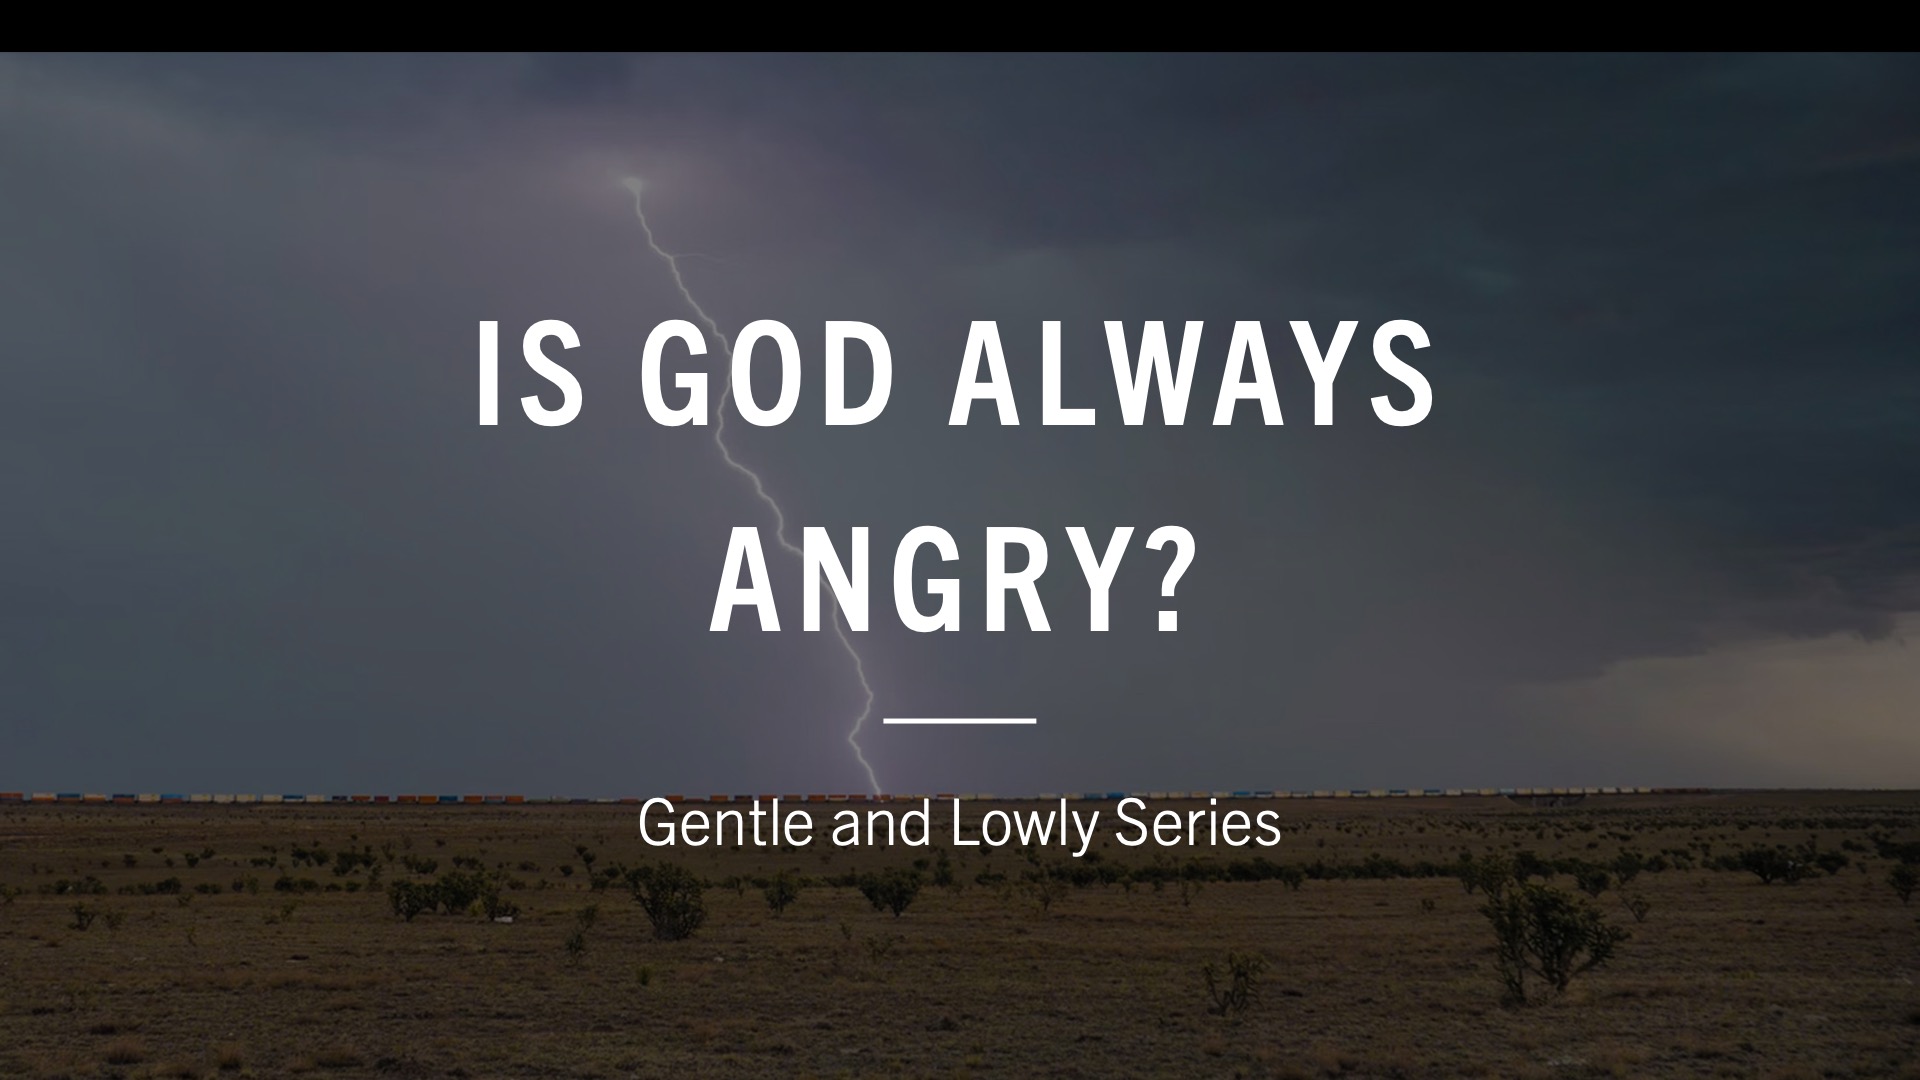 Is God always angry?